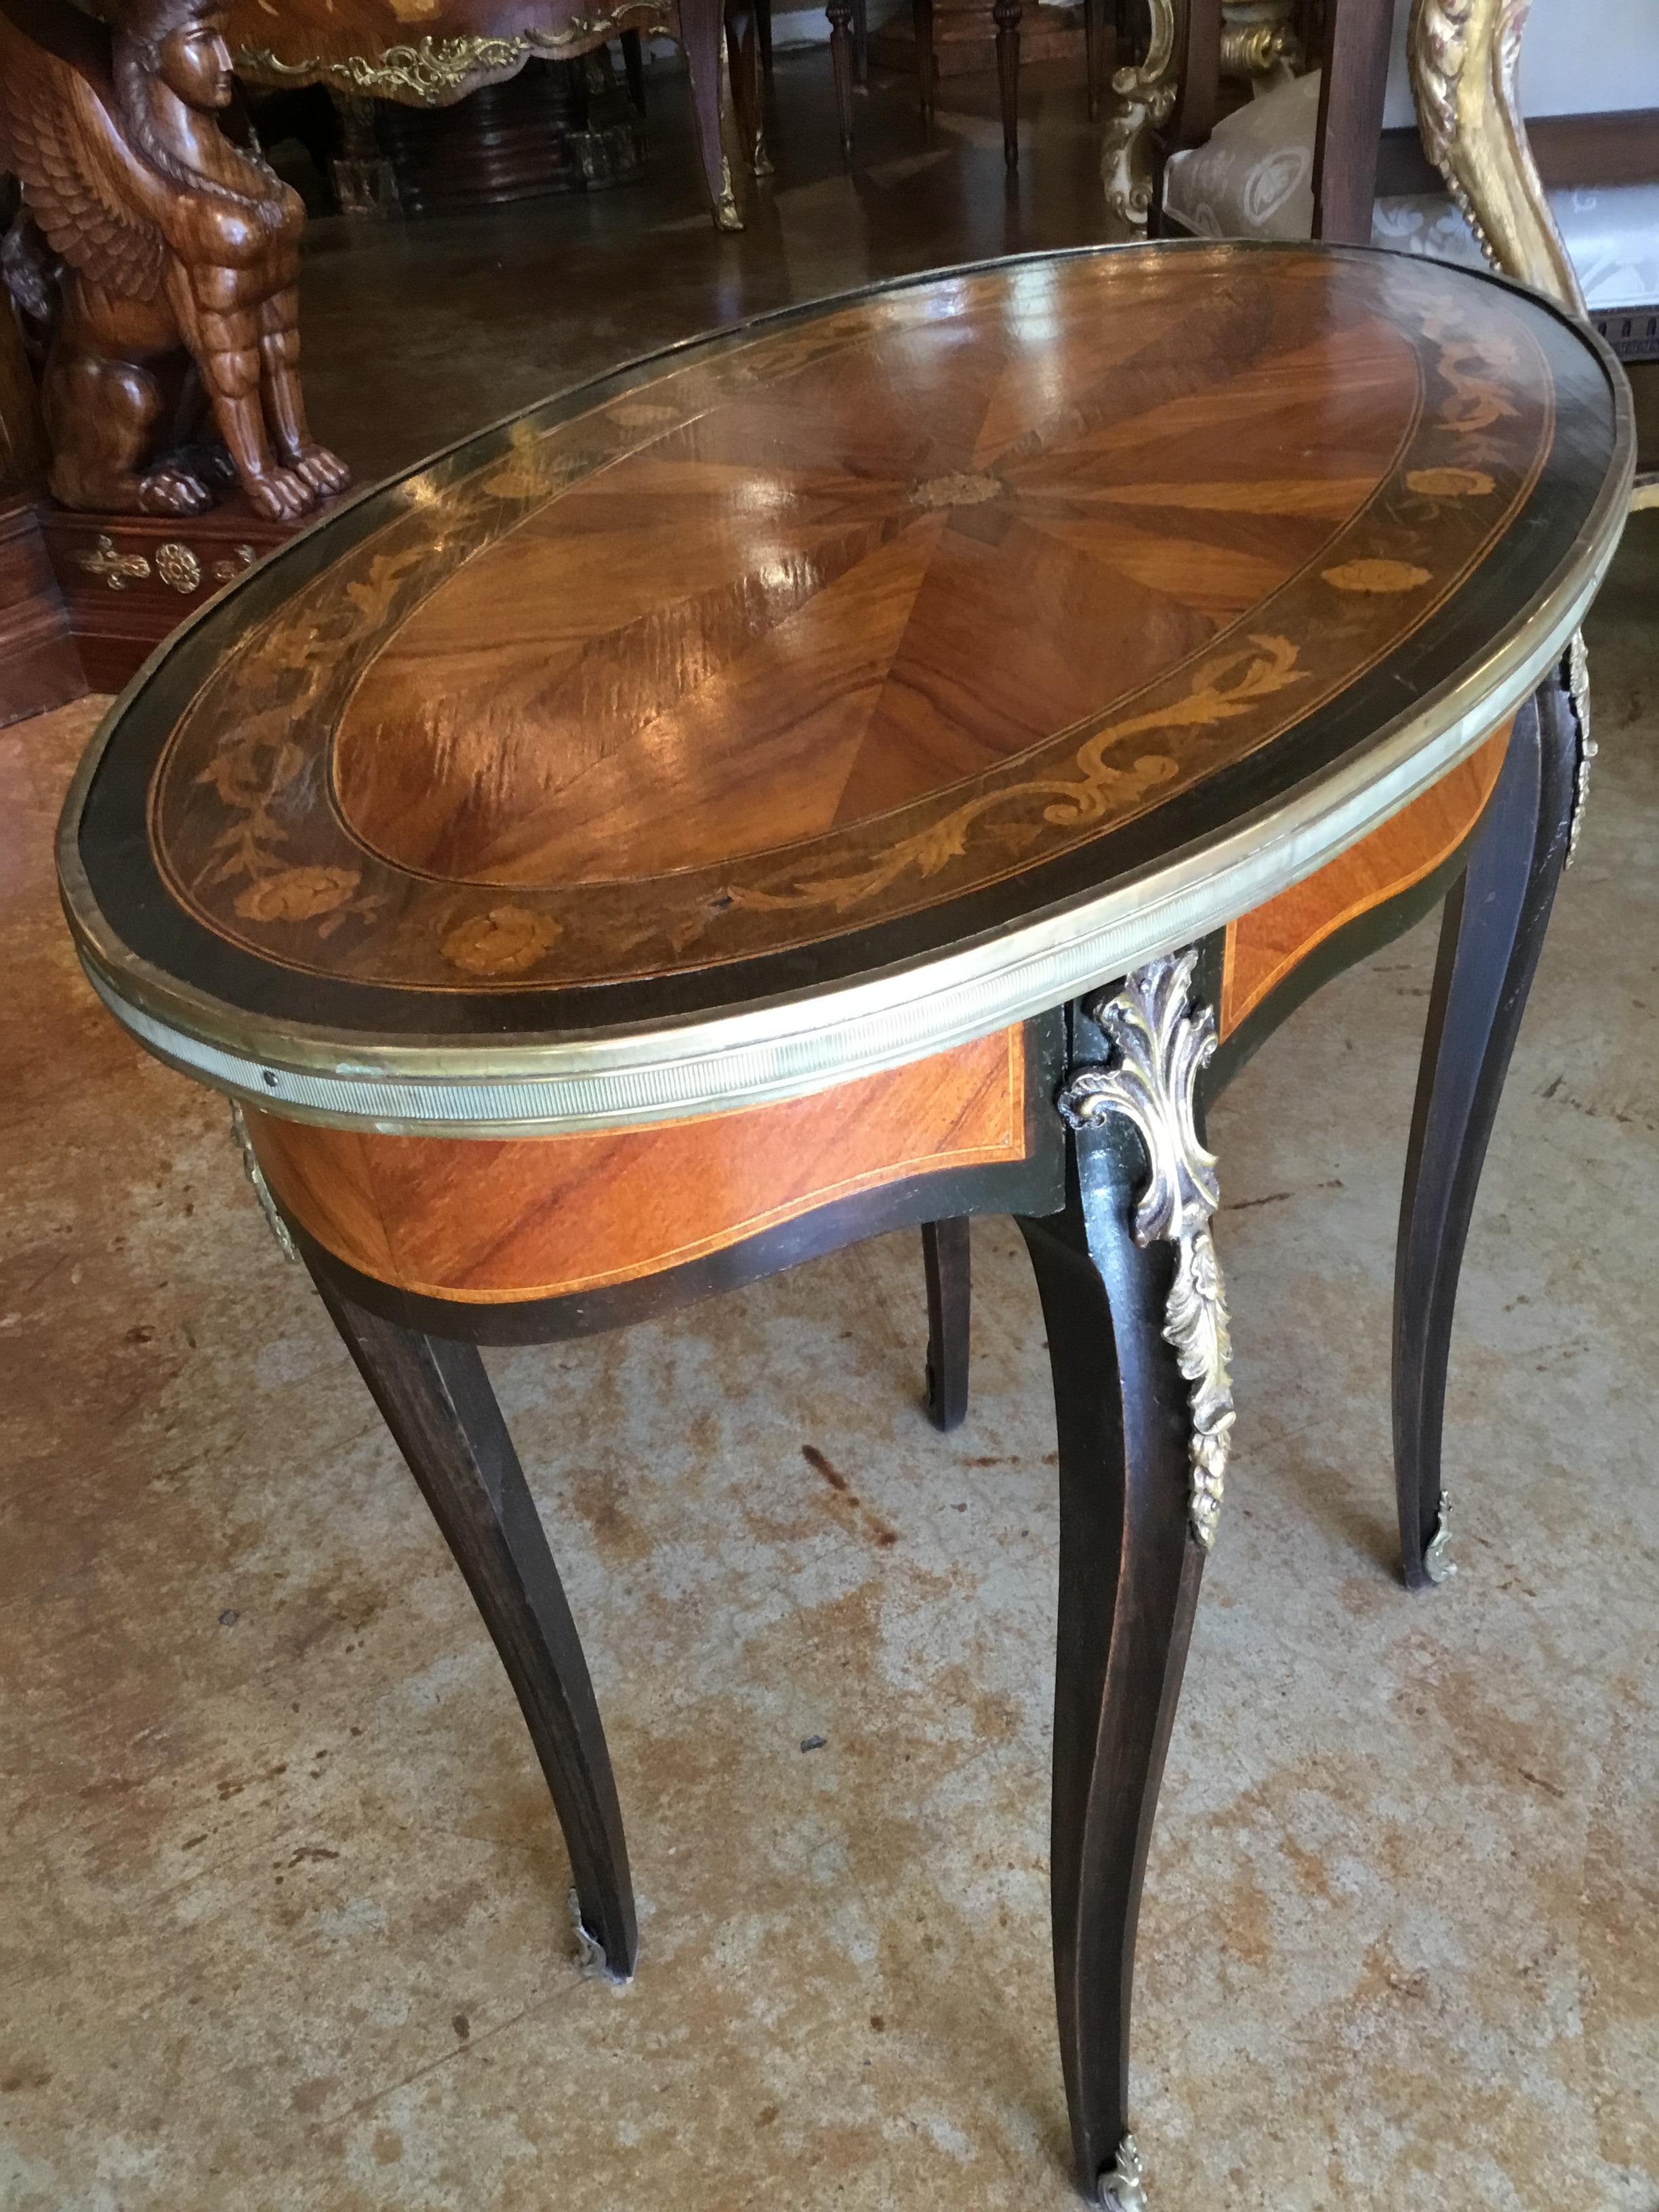 Lovely pair of side tables with graceful curved legs  ending in sabots.
The tops inlaid in satin wood and tulip wood with ebonized legs
They are oval in shape.